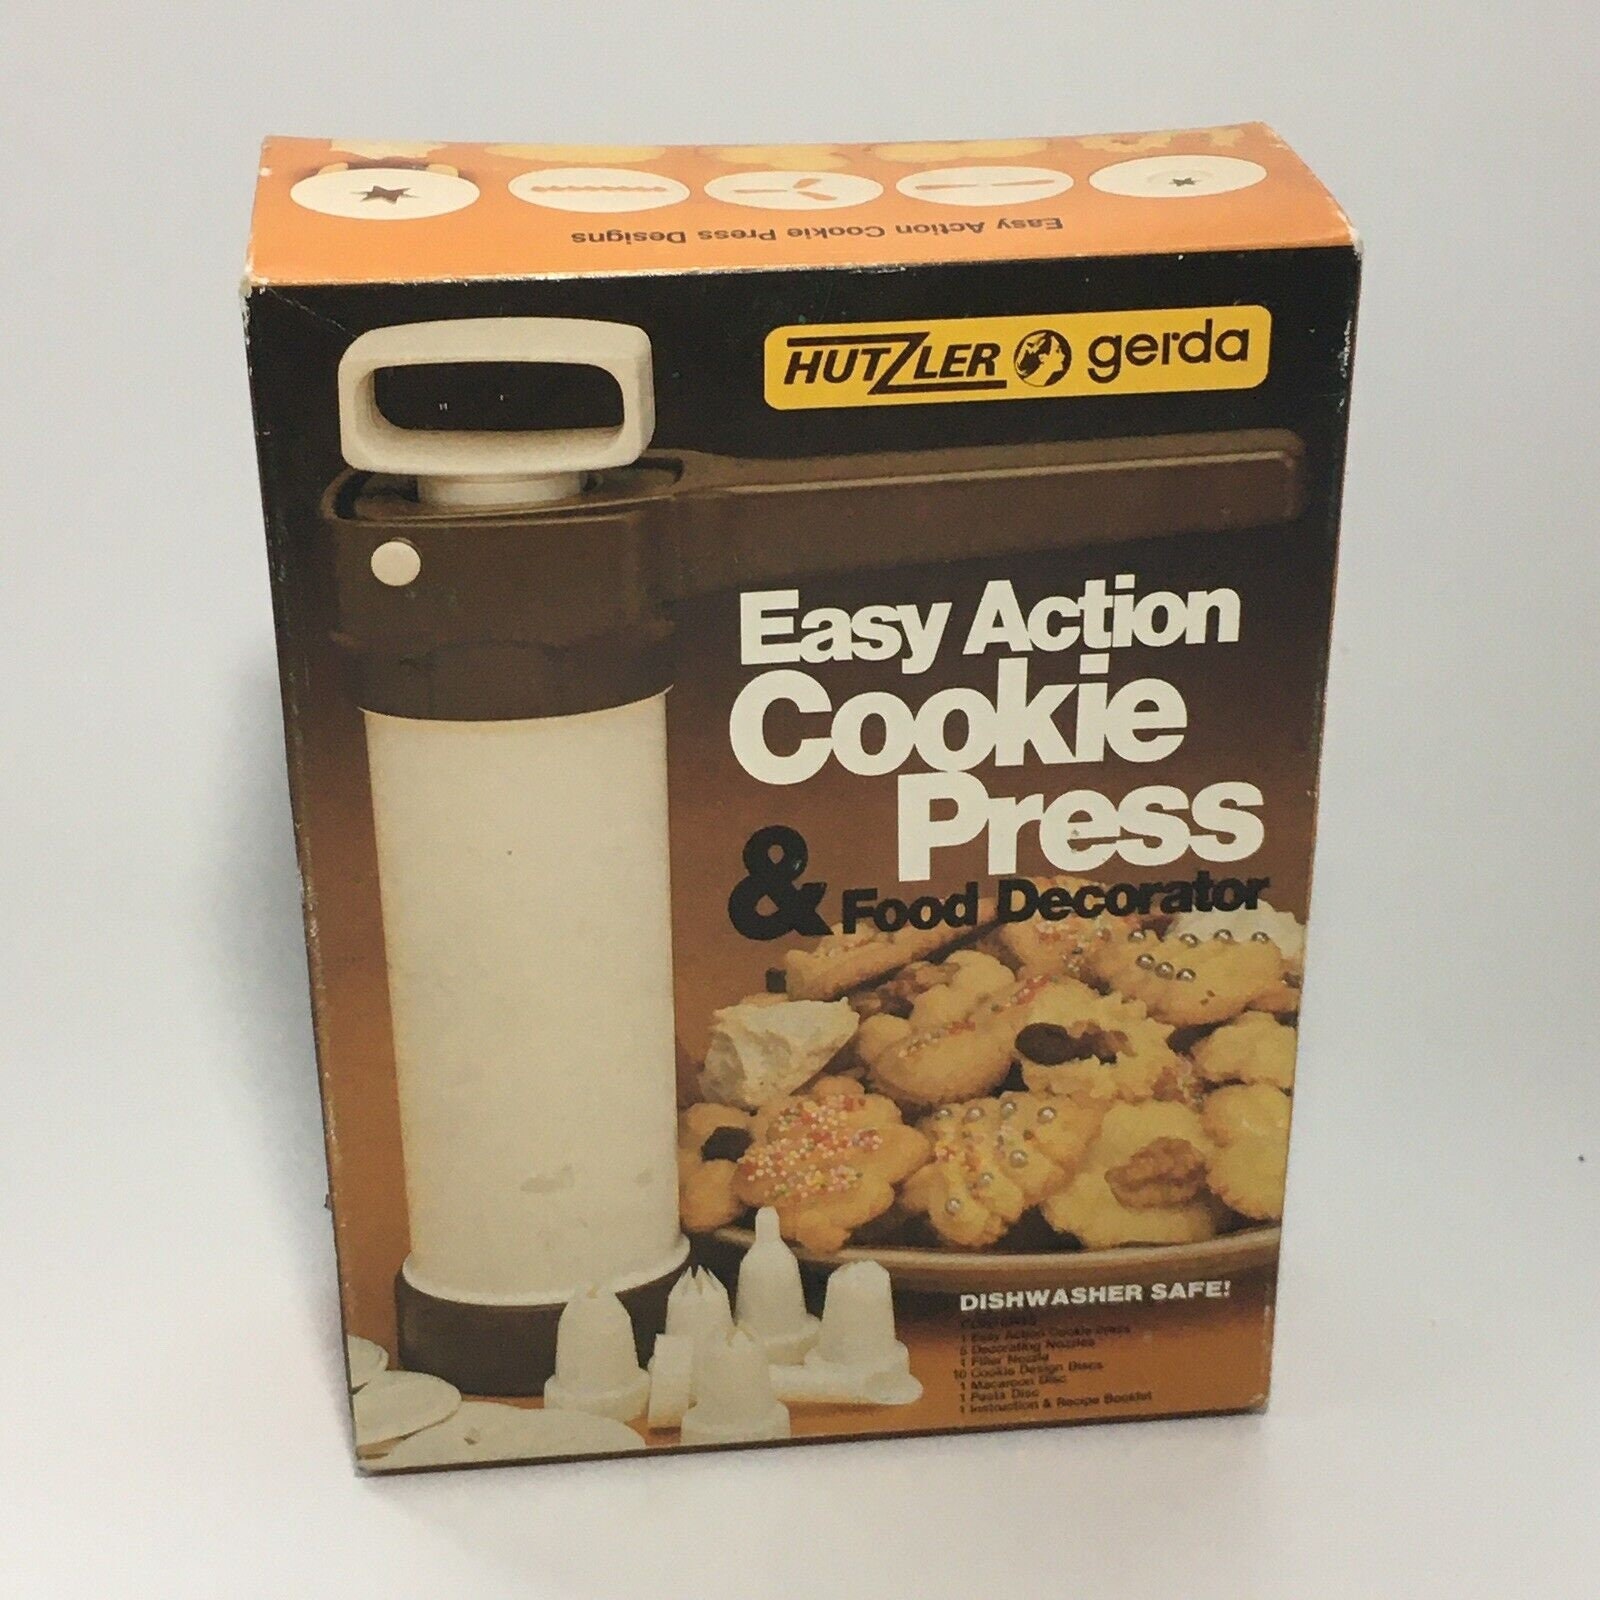 HAMILTON BEACH COOKIE PRESS AND CAKE & FOOD DECORATOR OPERATING  INSTRUCTIONS MANUAL Pdf Download